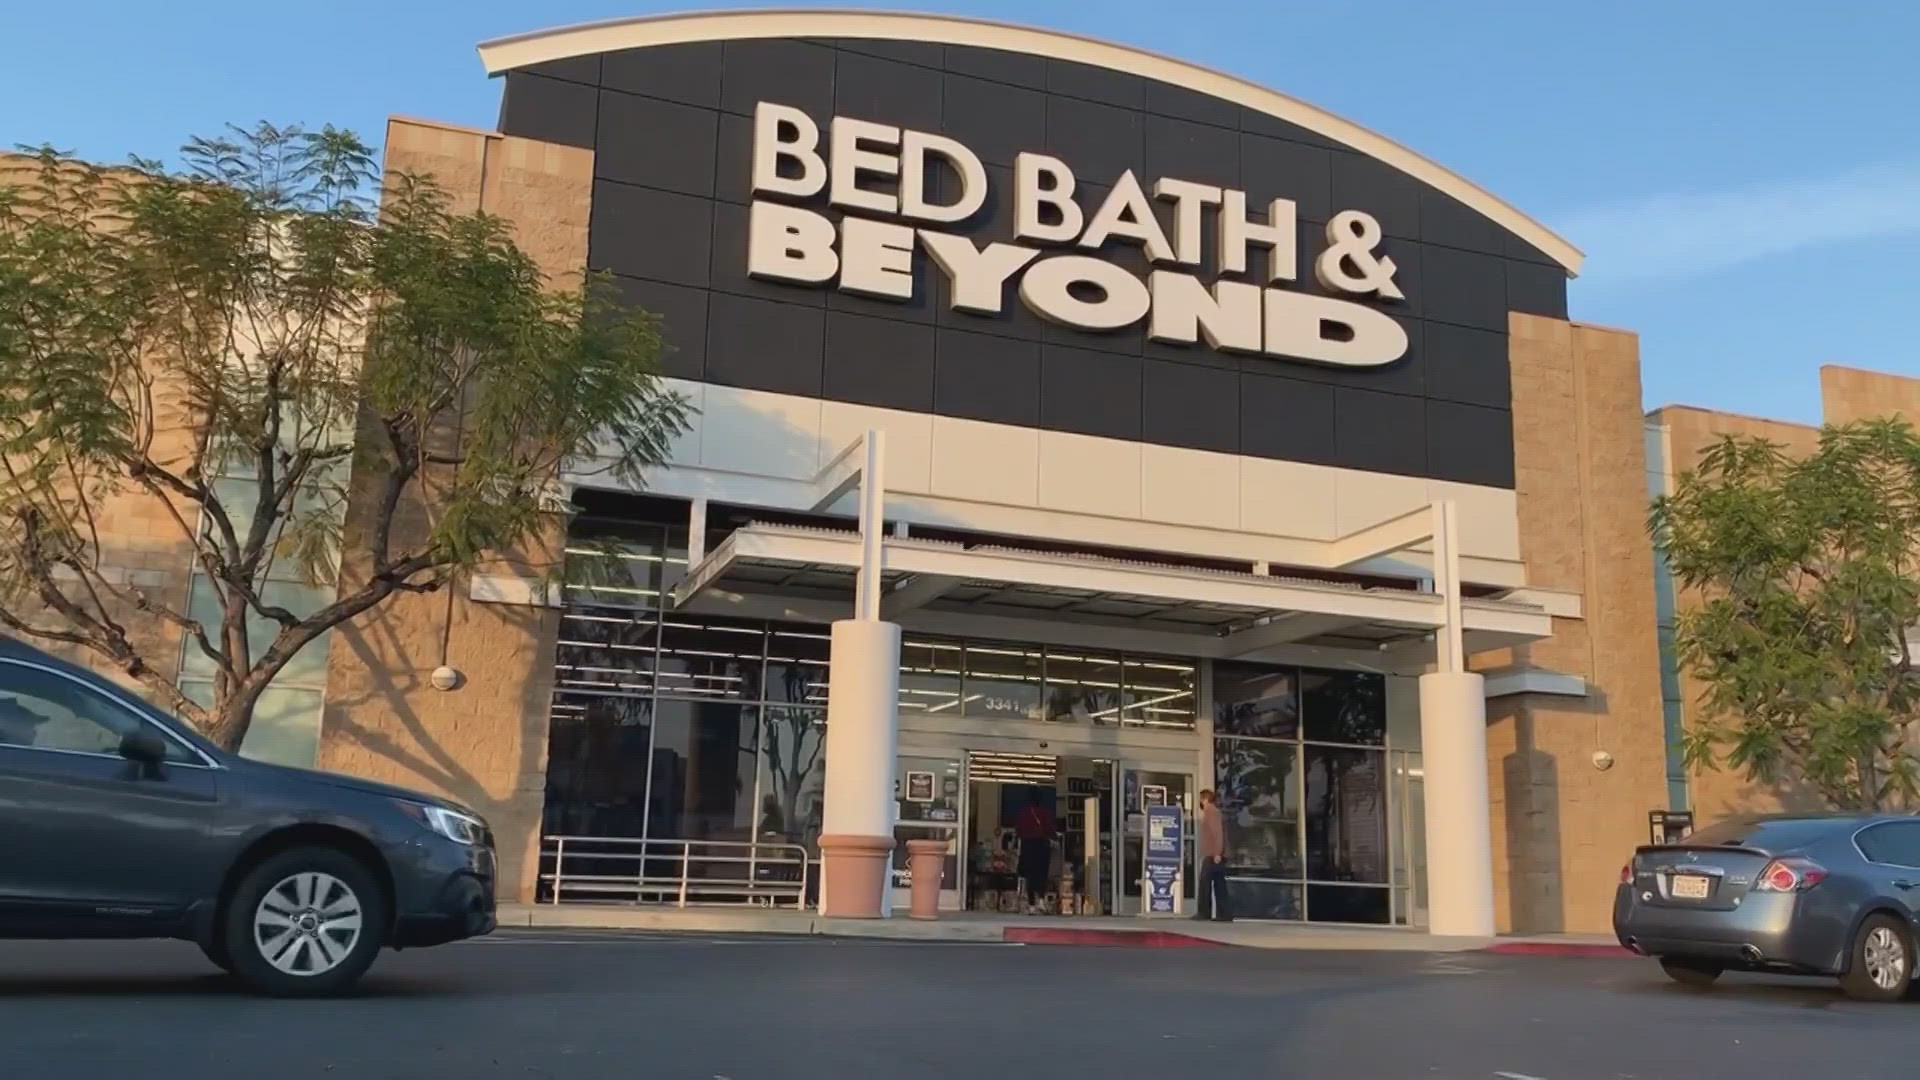 The Bed, Bath & Beyond liquidation sales starts Wednesday. The best shopping strategies to make the most of the deals.